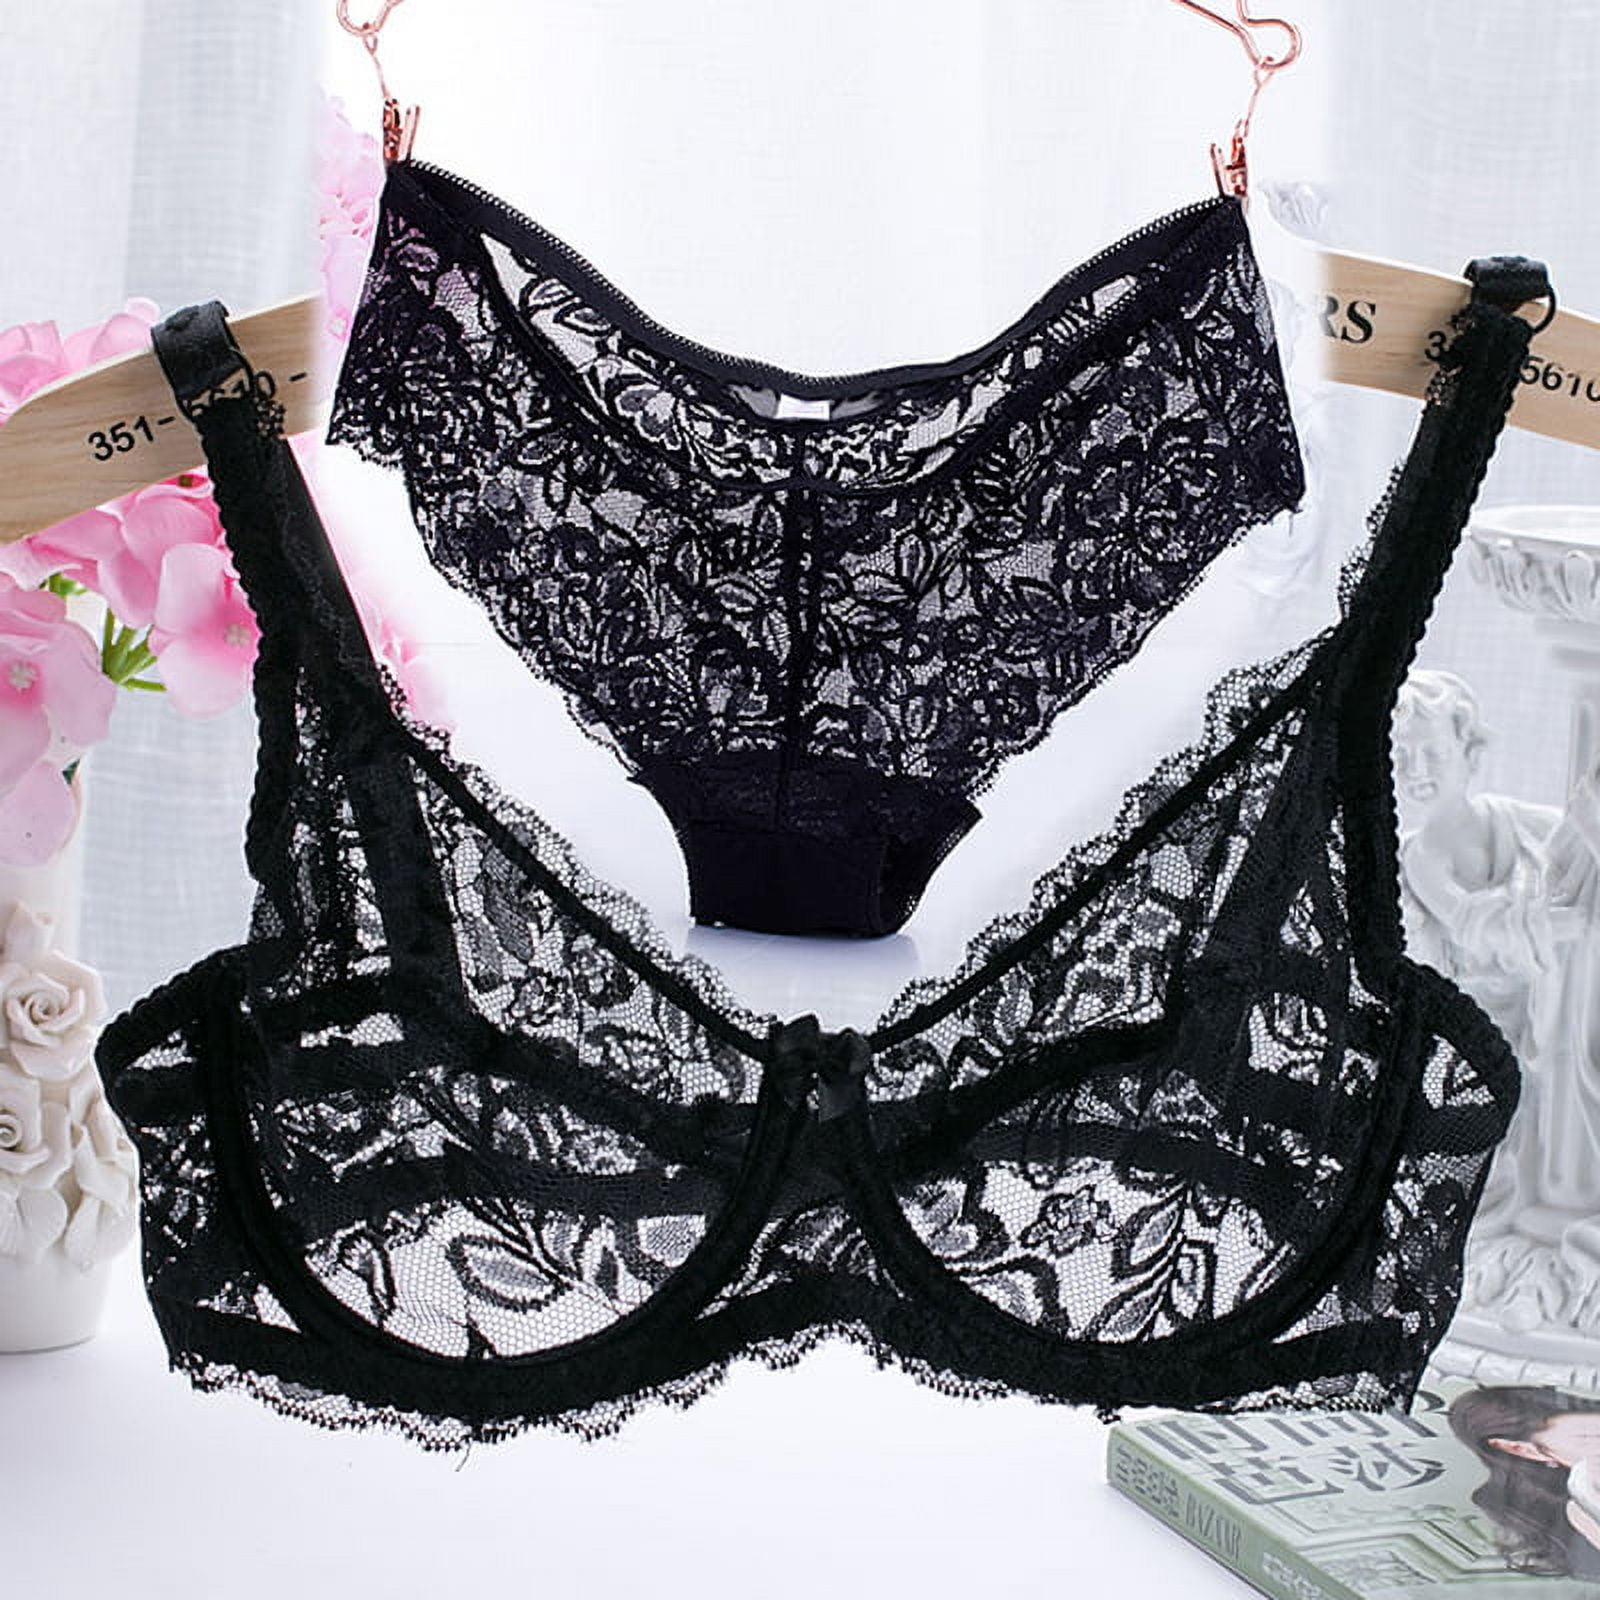 Festnight New Women Lace Gauze Bra Sets Push Up 3/4 Cup Hook-and- Eye  Breathable Ultra-thin bra Lingerie Underwear With Brief 